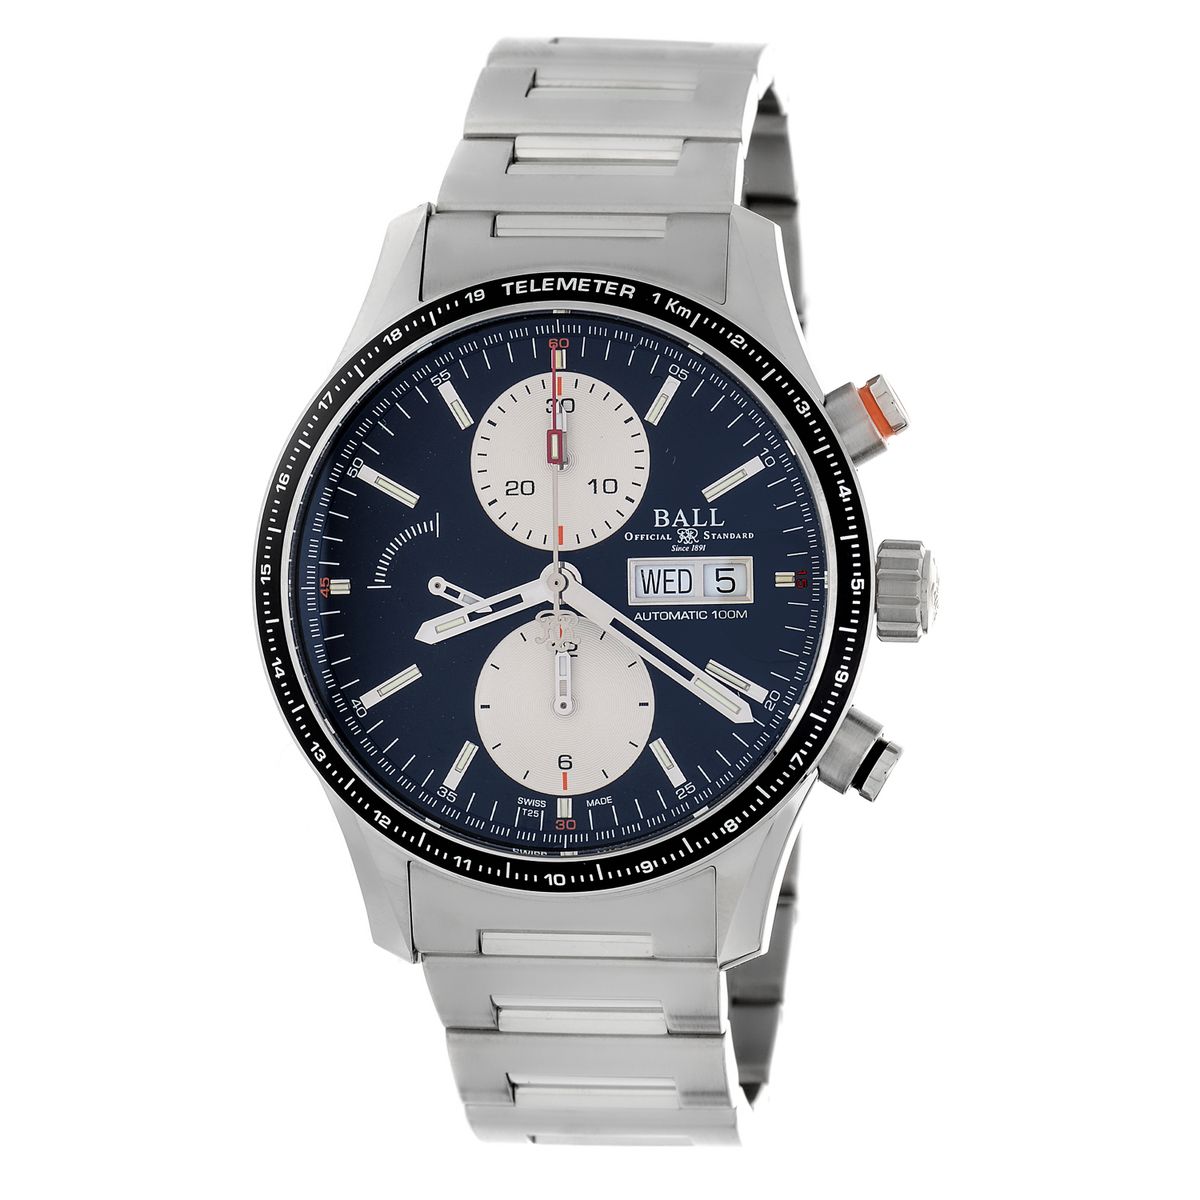 Ball Fireman Storm Chaser Pro Automatic Chronograph Automatic Watch $1295 + free s/h